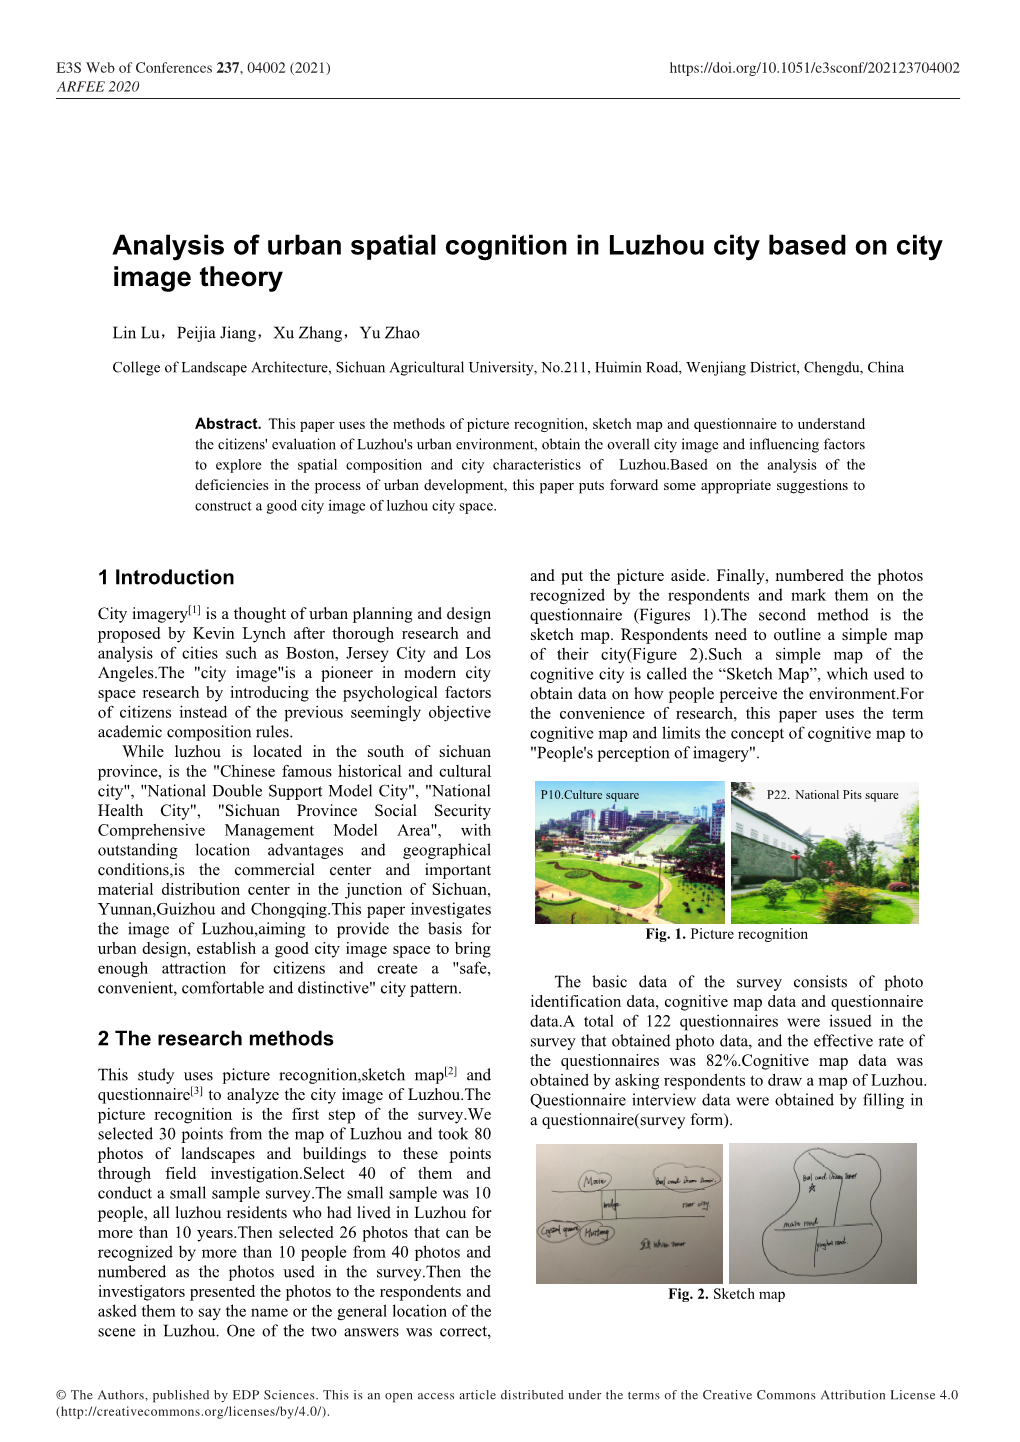 Analysis of Urban Spatial Cognition in Luzhou City Based on City Image Theory